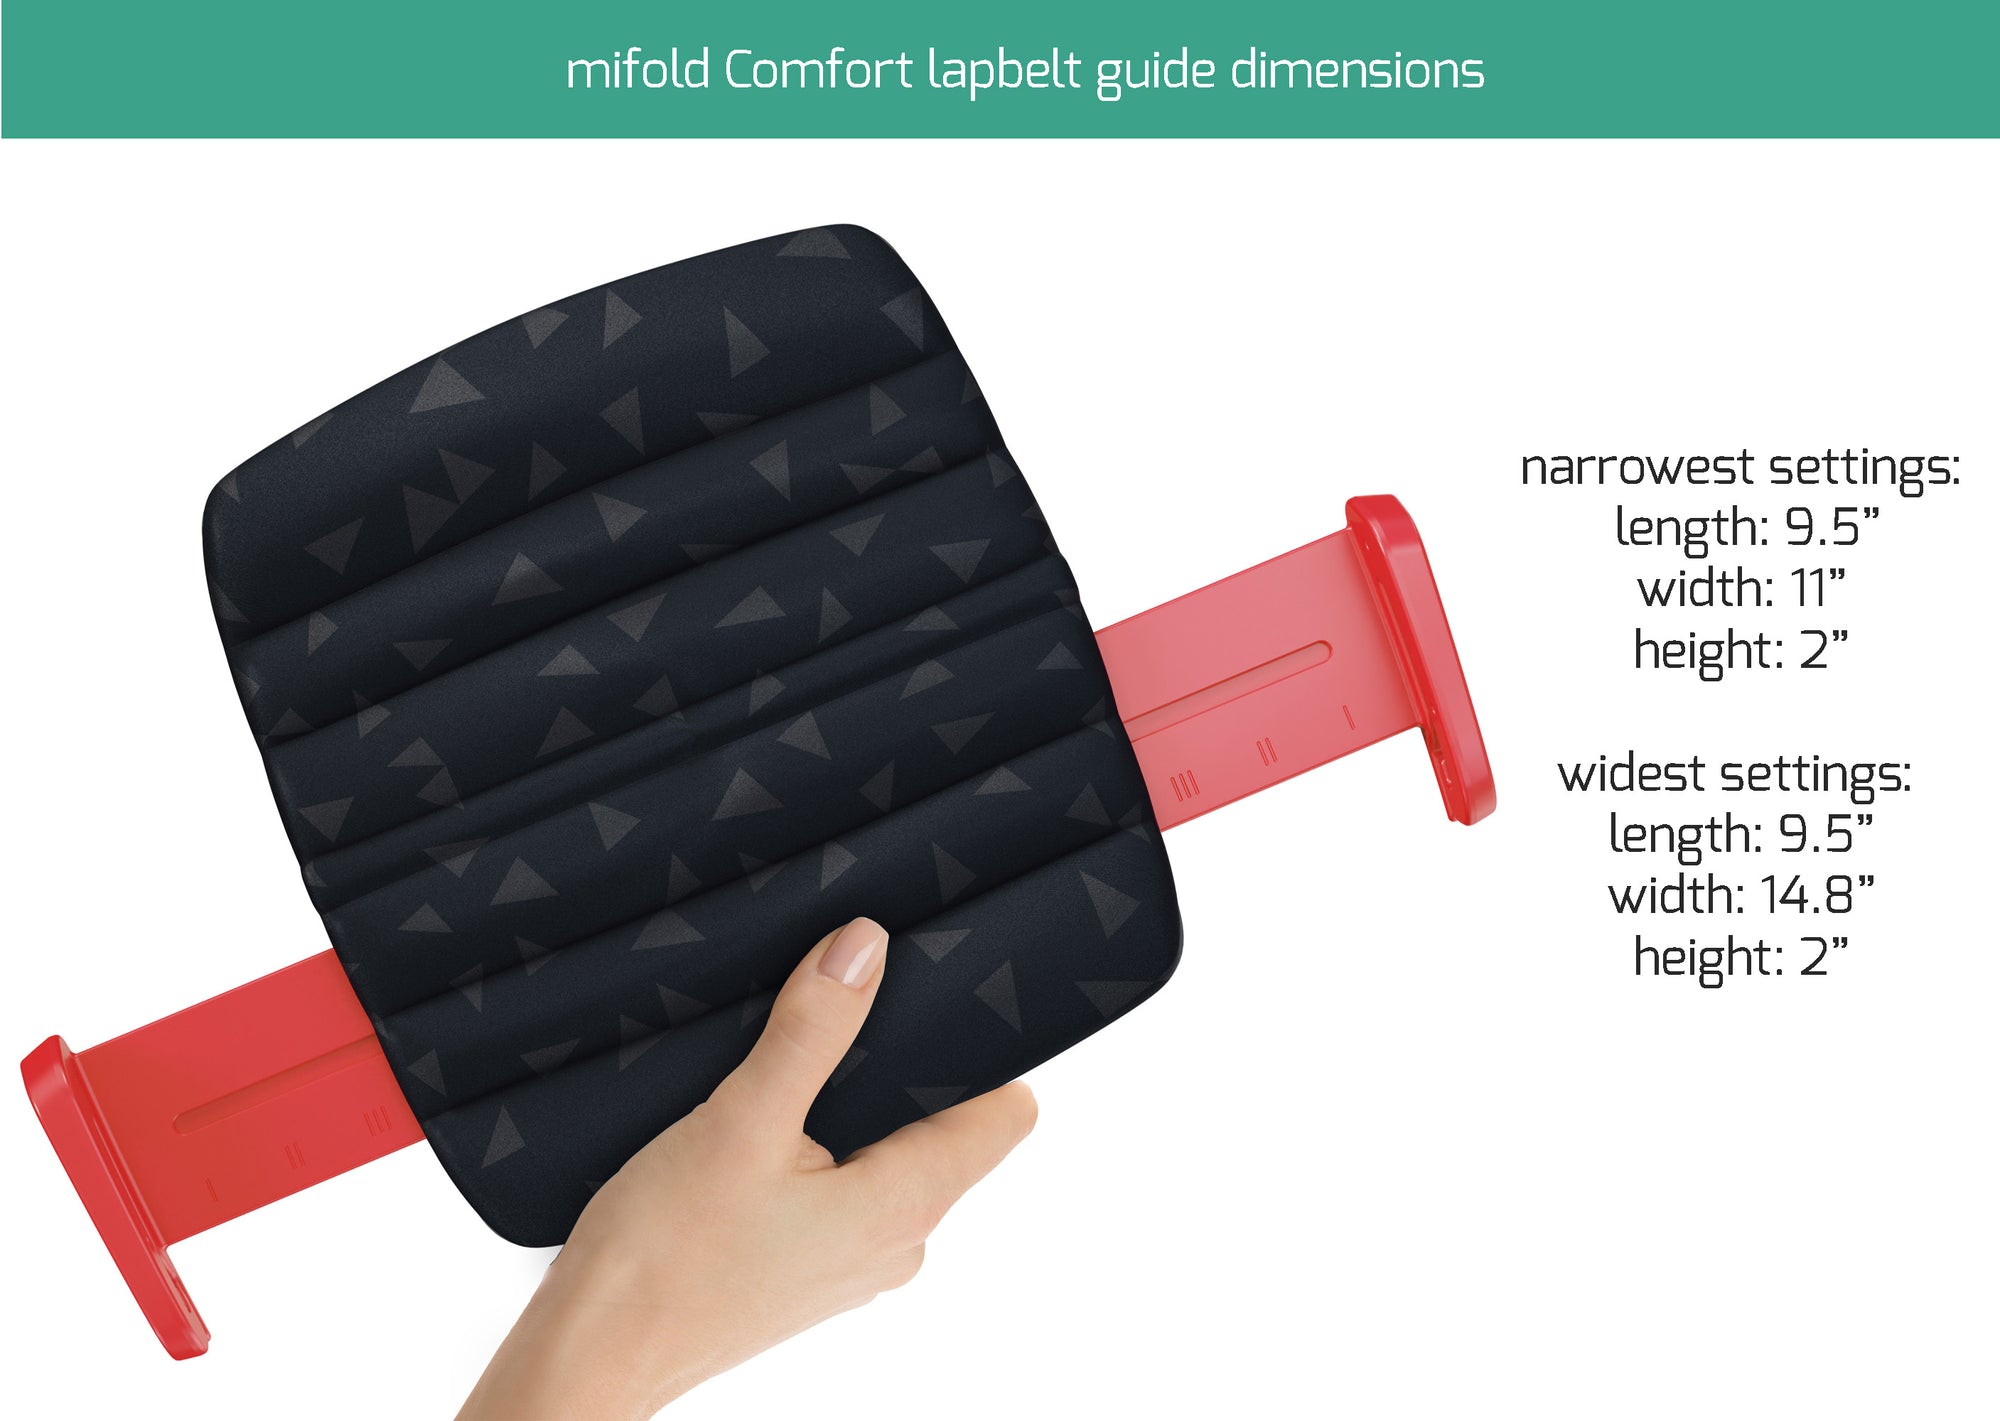 Dimensions of an open mifold Comfort seat